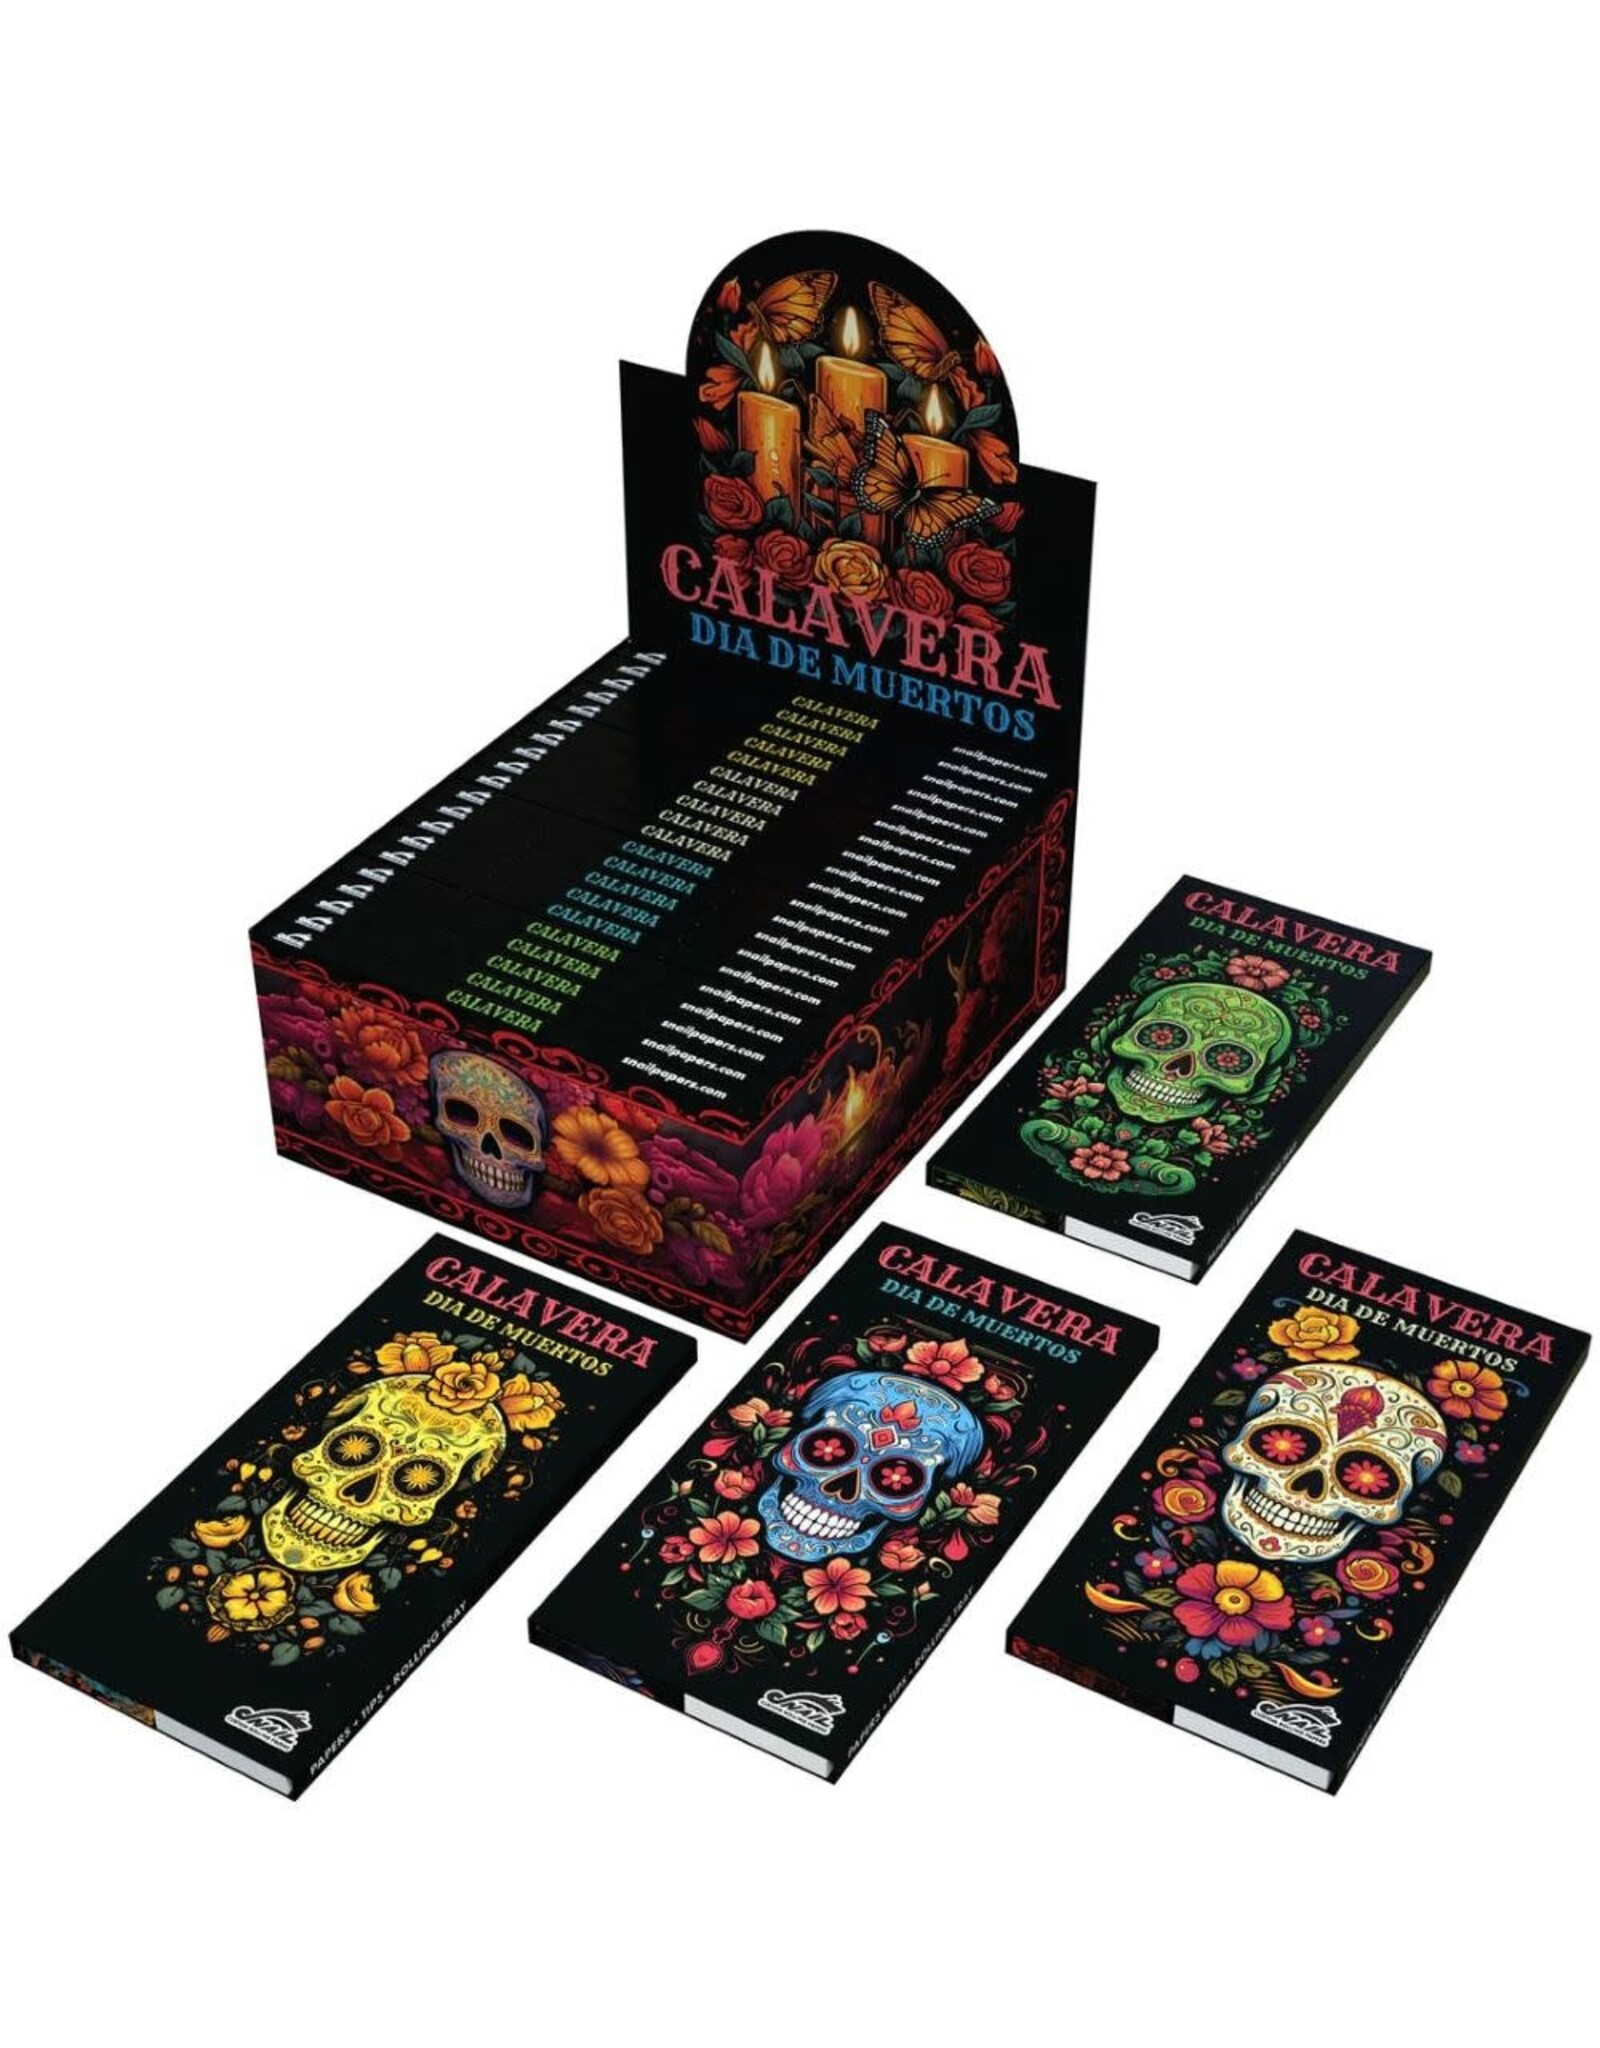 Snail Snail Rolling Papers KS+tips magnetic closure "Calavera"